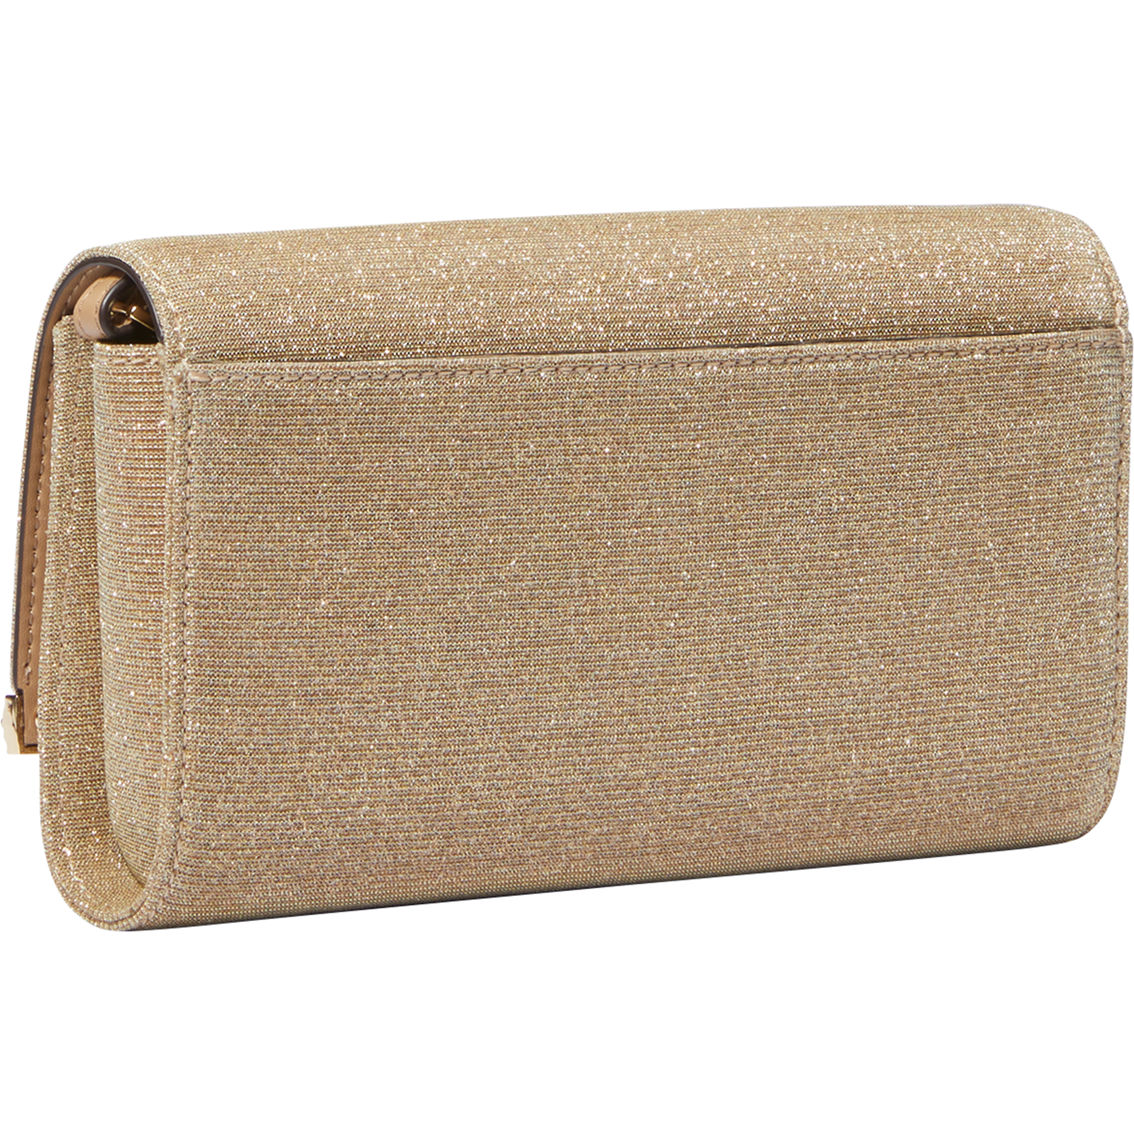 Michael Kors Mona Pale Gold Large East West Clutch - Image 2 of 4